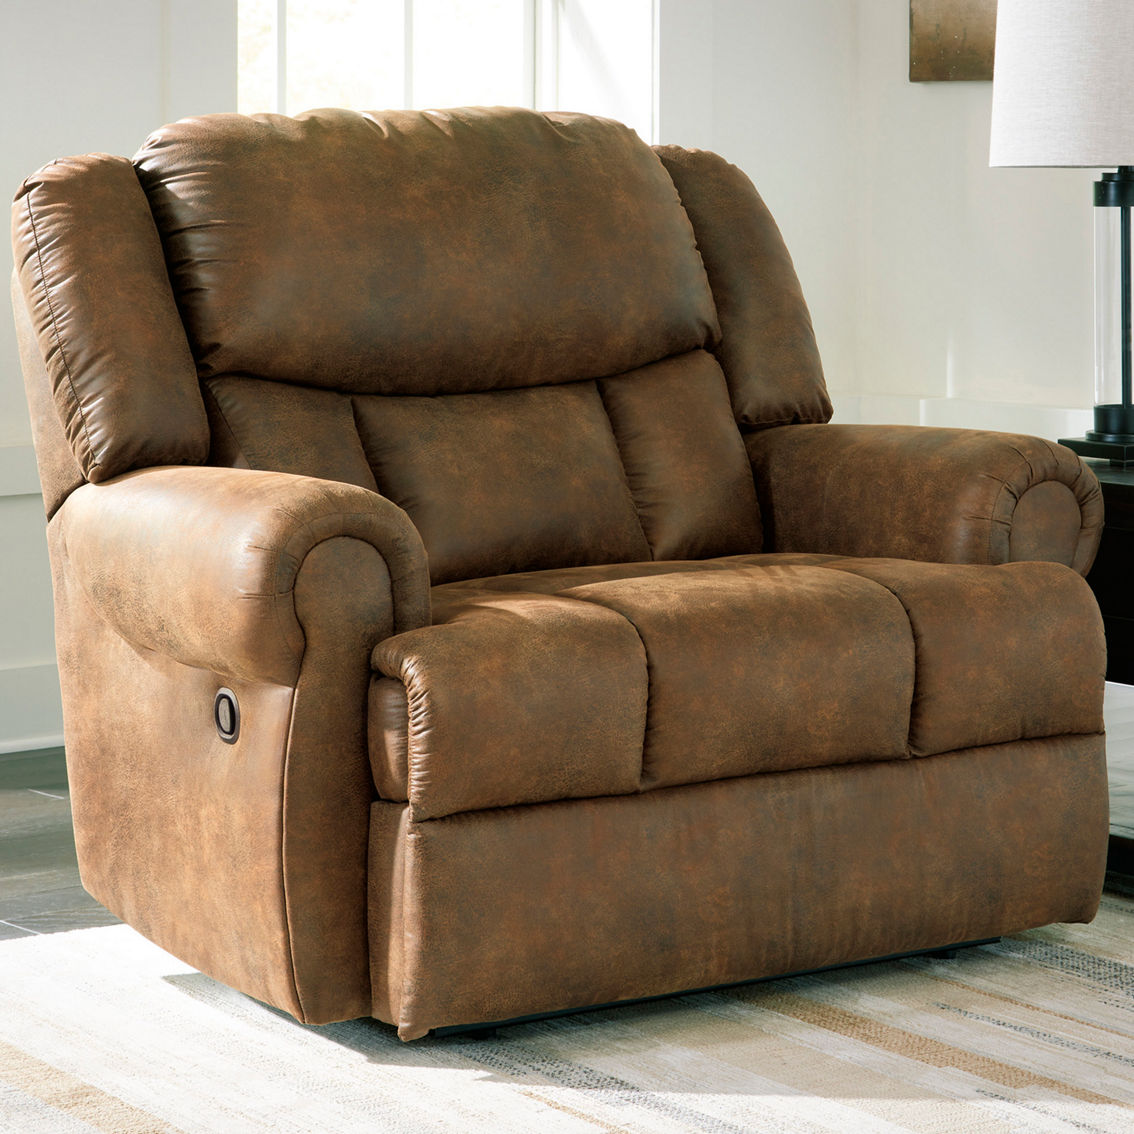 Signature Design by Ashley Boothbay Oversized Recliner - Image 6 of 8